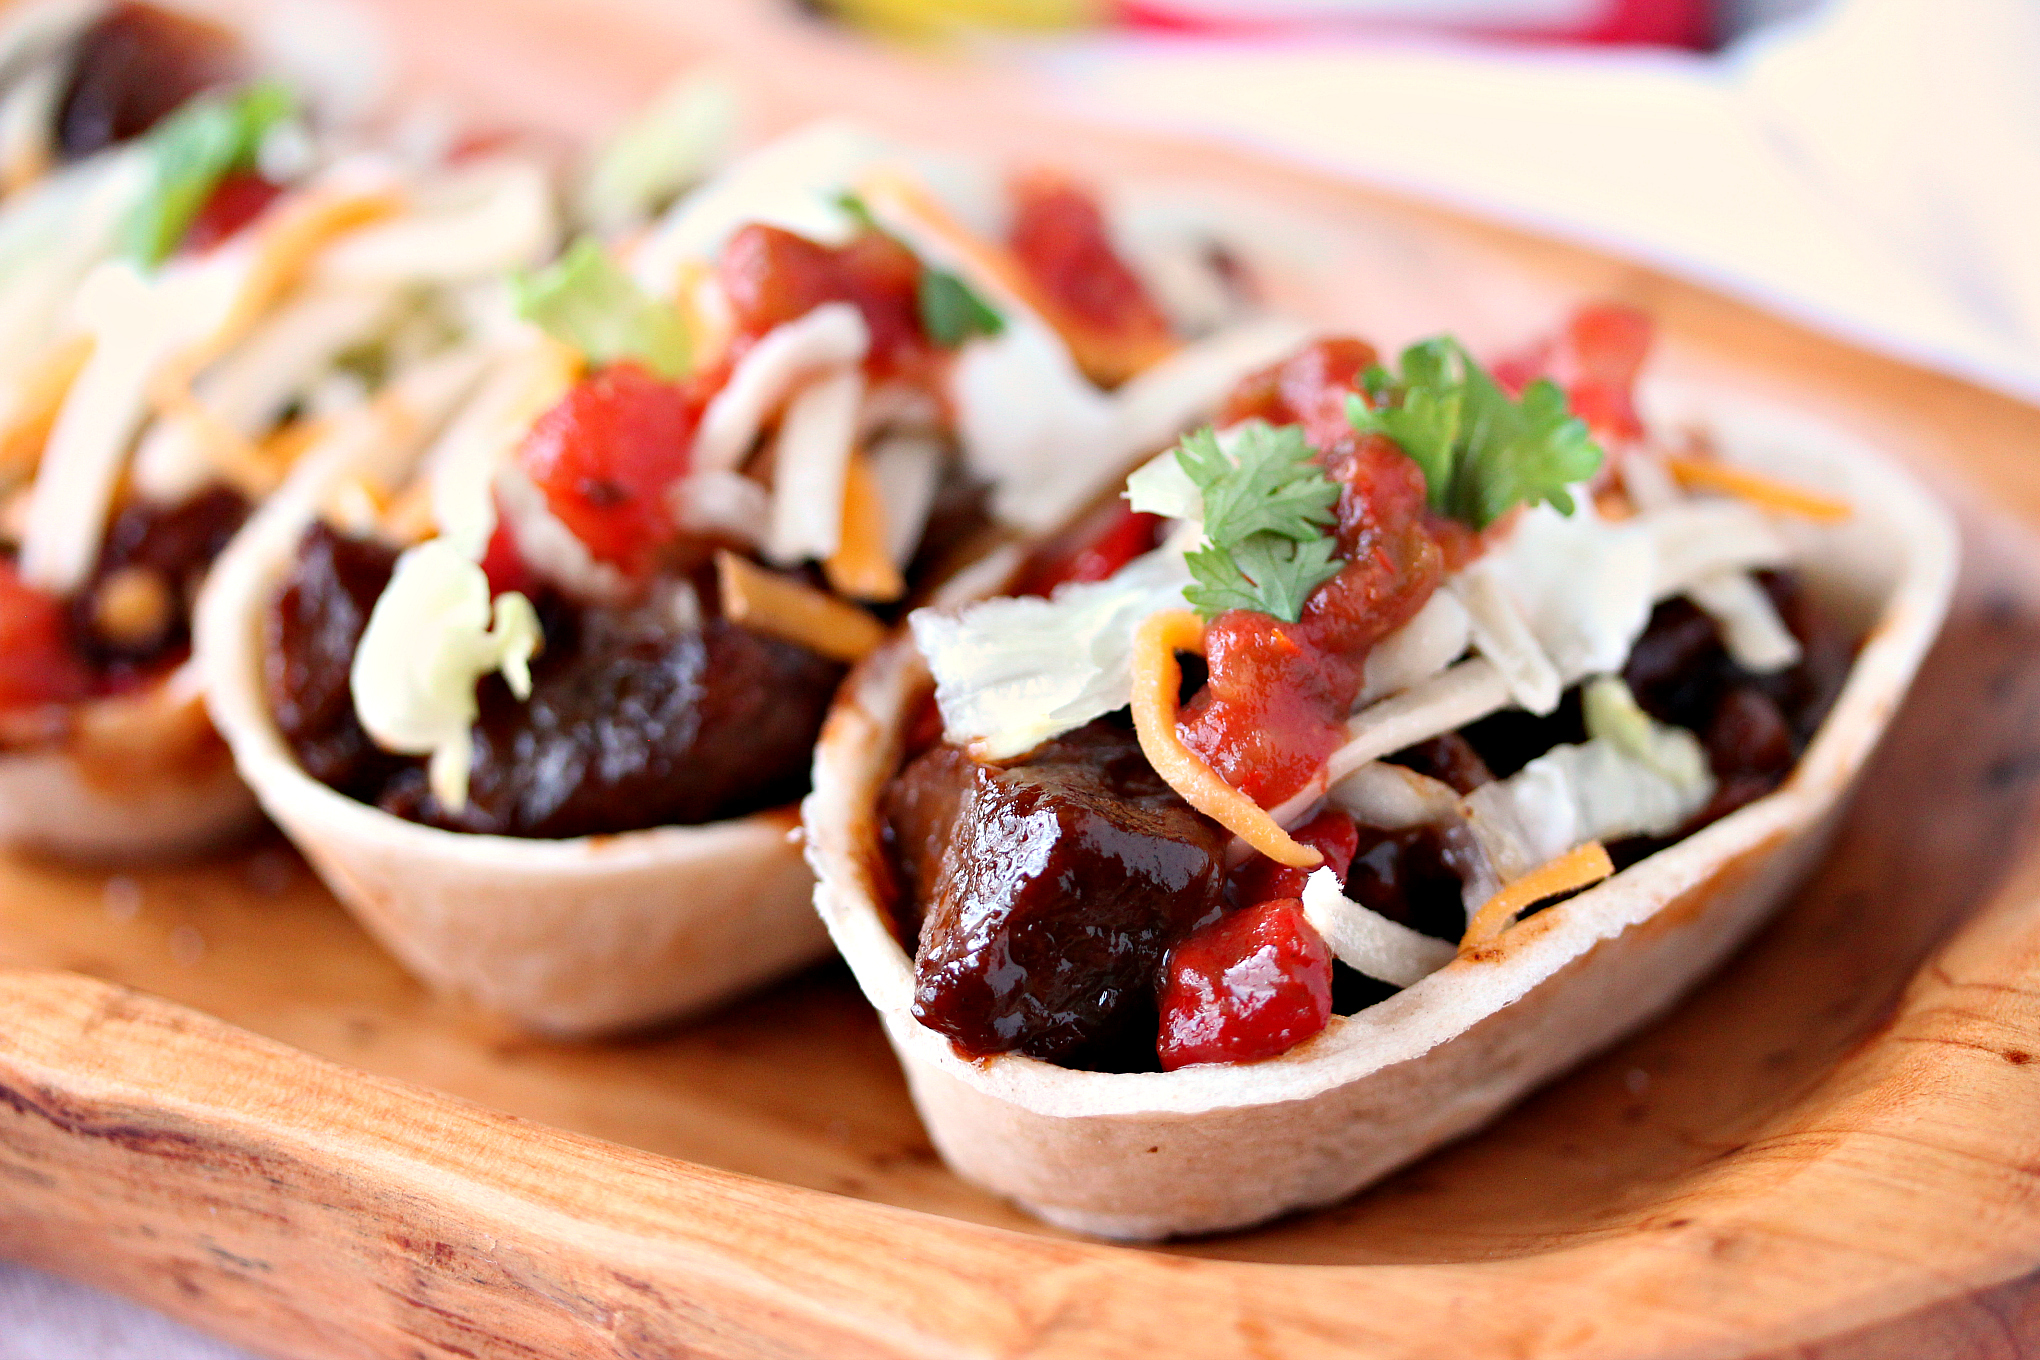 Steak Bites Mini Taco Boats from cravingsofalunatic.com- This taco recipe uses steak marinated in beer, then cooked to perfection in a cast iron skillet, and topped with Barbecue Sauce. It's Tex-Mex in mini form. Every bite is full of flavour. (@CravingsLunatic)